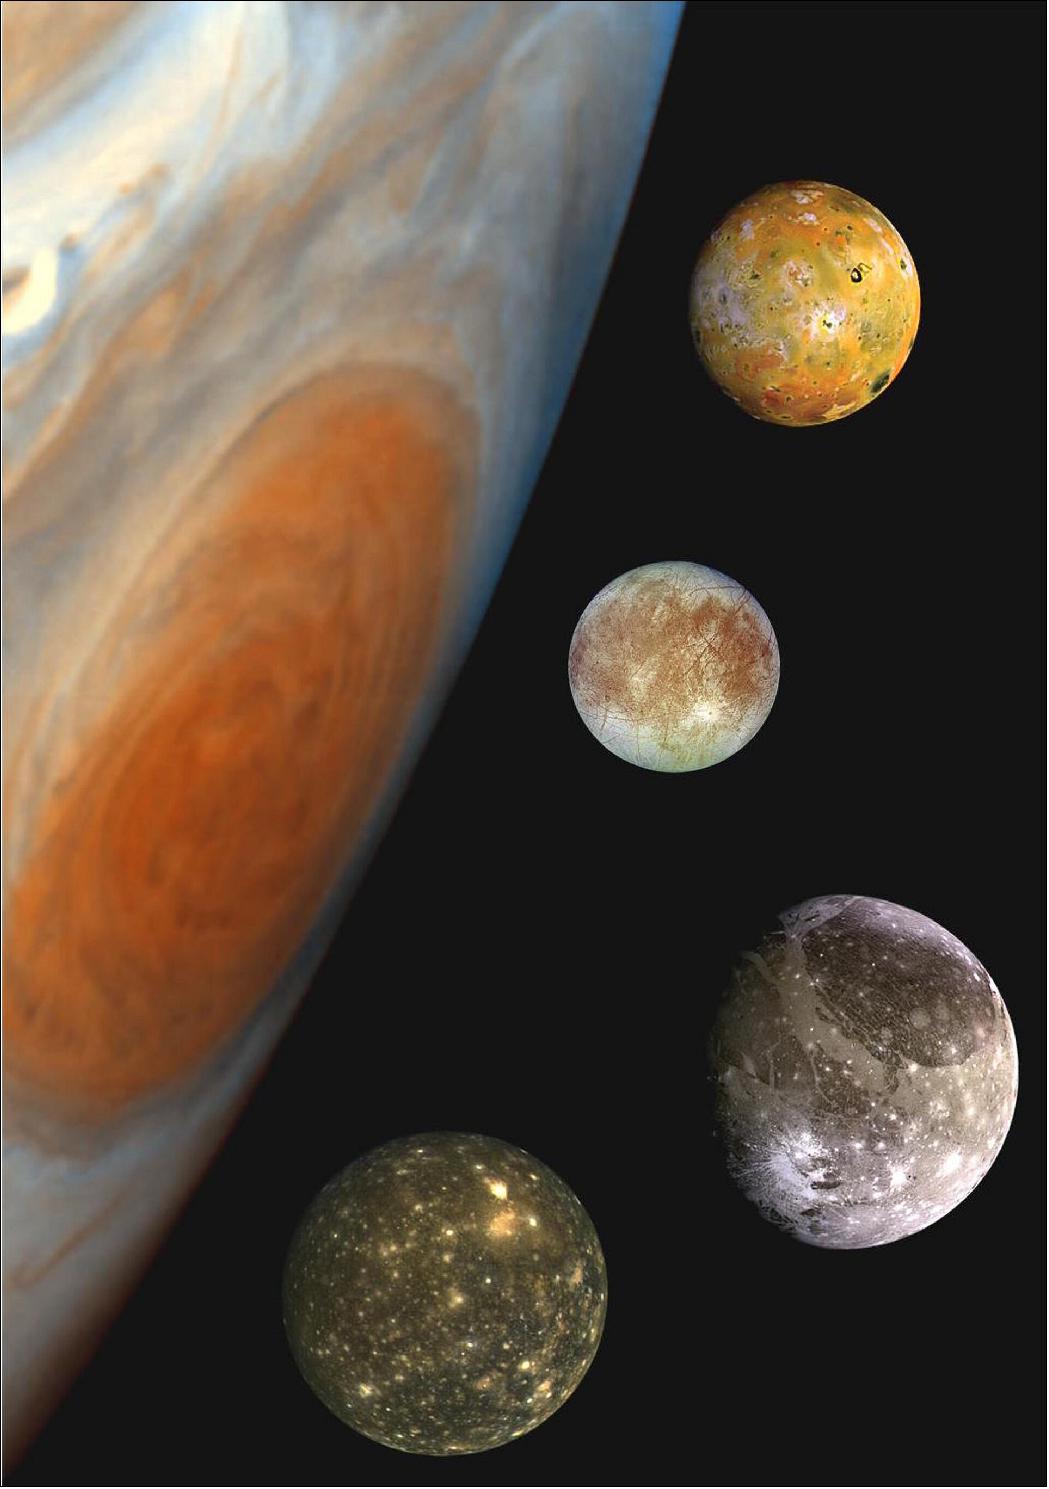 Figure 7: Jupiter's largest moons. This 'family portrait' shows a composite of images of Jupiter, including it's Great Red Spot, and its four largest moons. From top to bottom, the moons are Io, Europa, Ganymede and Callisto. Europa is almost the same size as Earth's moon, while Ganymede, the largest moon in the Solar System, is larger than planet Mercury. - While Io is a volcanically active world, Europa, Ganymede and Callisto are icy, and may have oceans of liquid water under their crusts. Europa in particular may even harbour a habitable environment. -Jupiter and its large icy moons will provide a key focus for ESA's Juice mission. The spacecraft will tour the Jovian system for about three-and-a-half years, including flybys of the moons. It will also enter orbit around Ganymede, the first time any moon beyond our own has been orbited by a spacecraft. - The images of Jupiter, Io, Europa and Ganymede were taken by NASA's Galileo probe in 1996, while the Callisto image is from the 1979 flyby of Voyager. [(Image via NASA Photojournal), image credit: NASA/JPL/DLR]